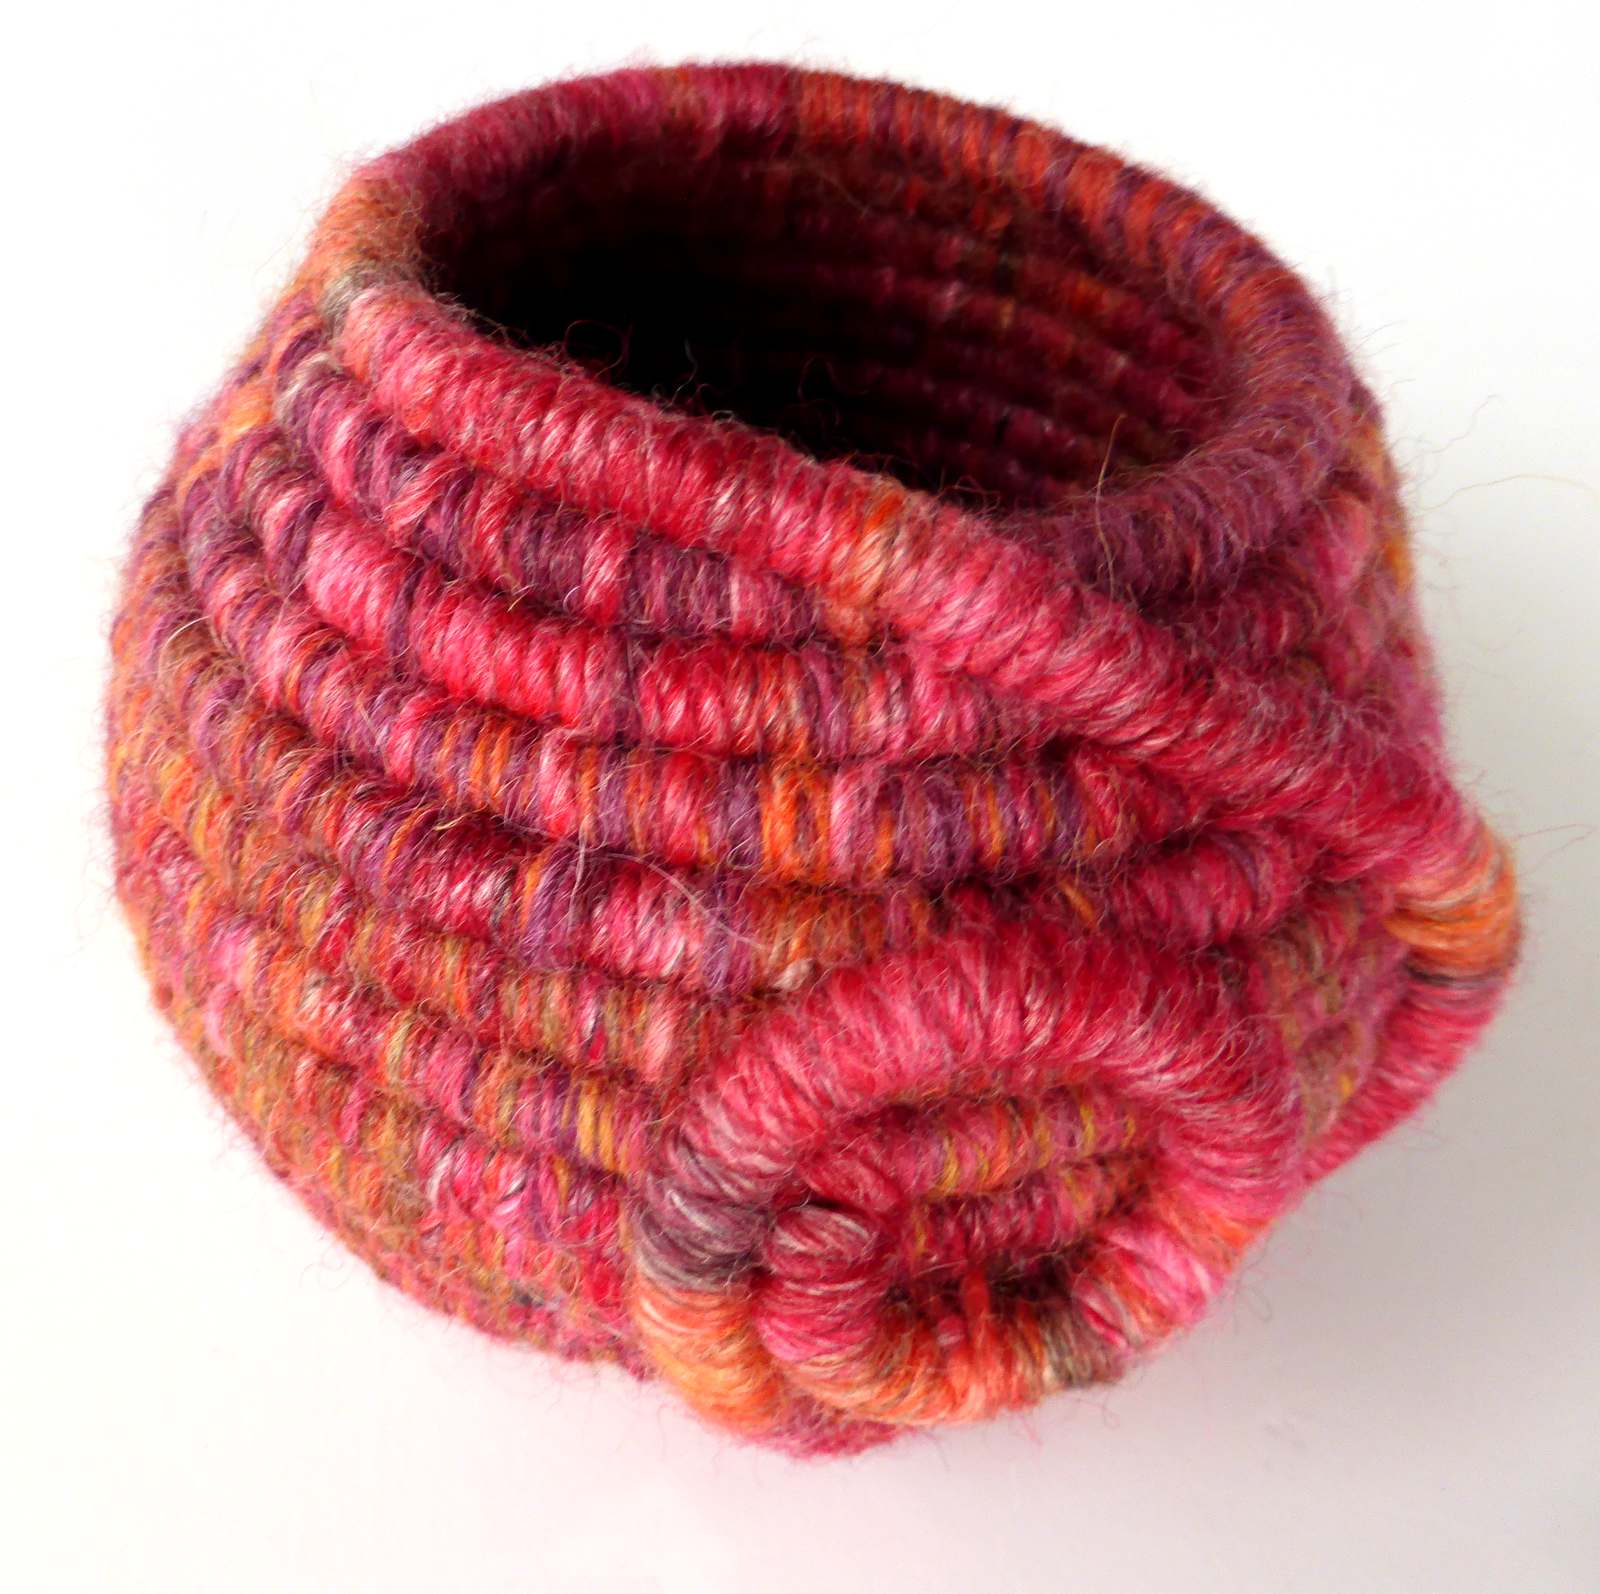 Red Coil Basket by Andrea McCallum